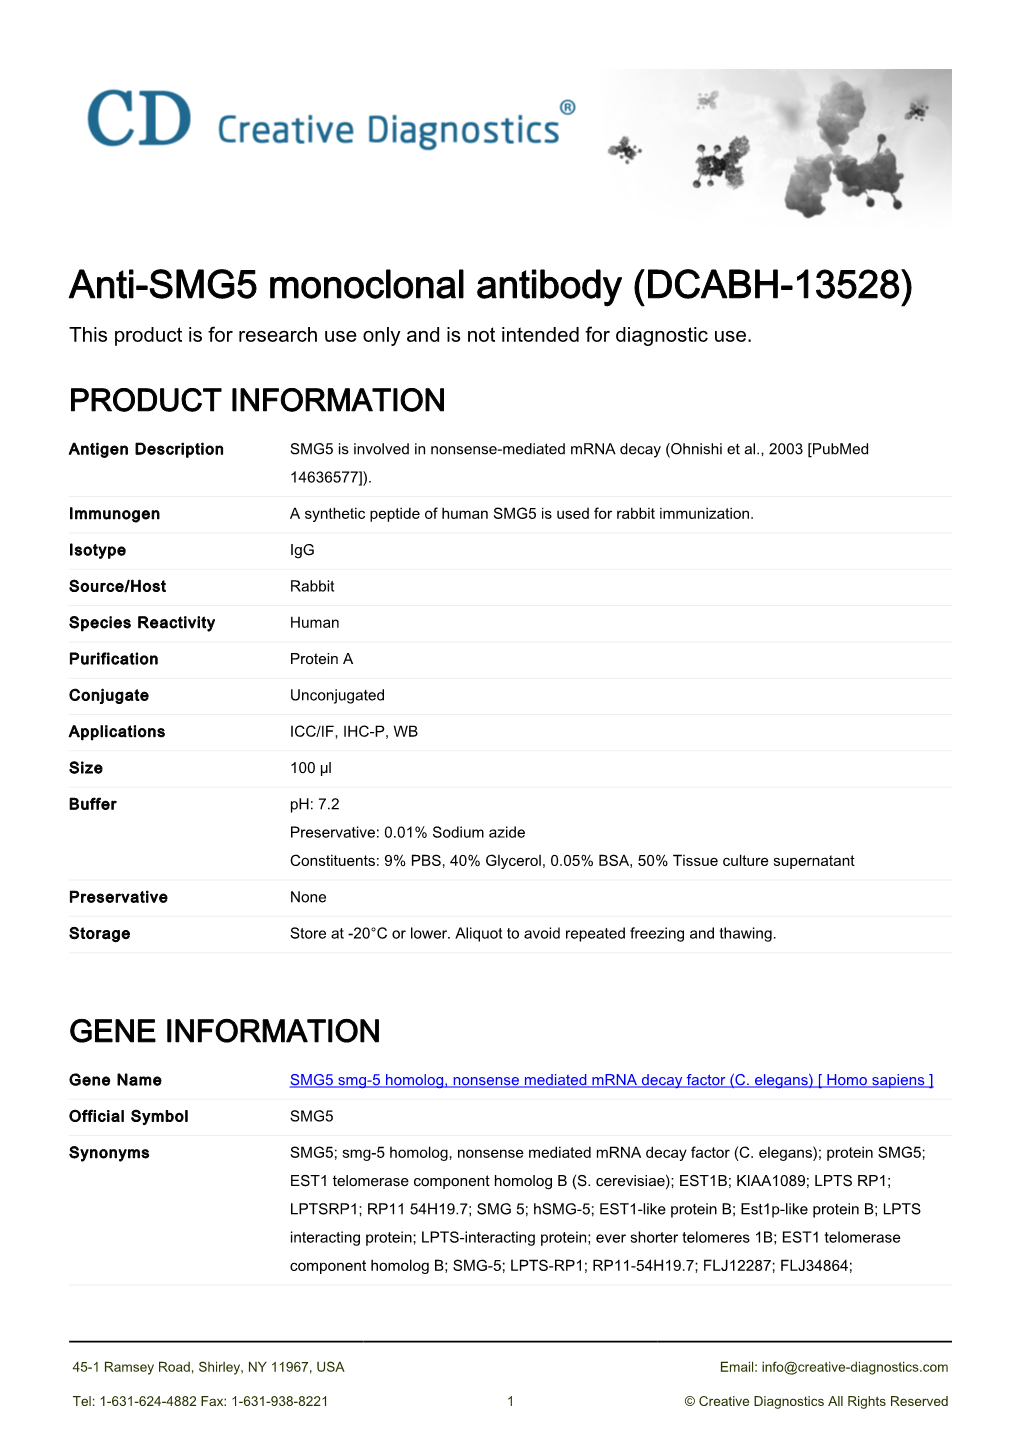 Anti-SMG5 Monoclonal Antibody (DCABH-13528) This Product Is for Research Use Only and Is Not Intended for Diagnostic Use